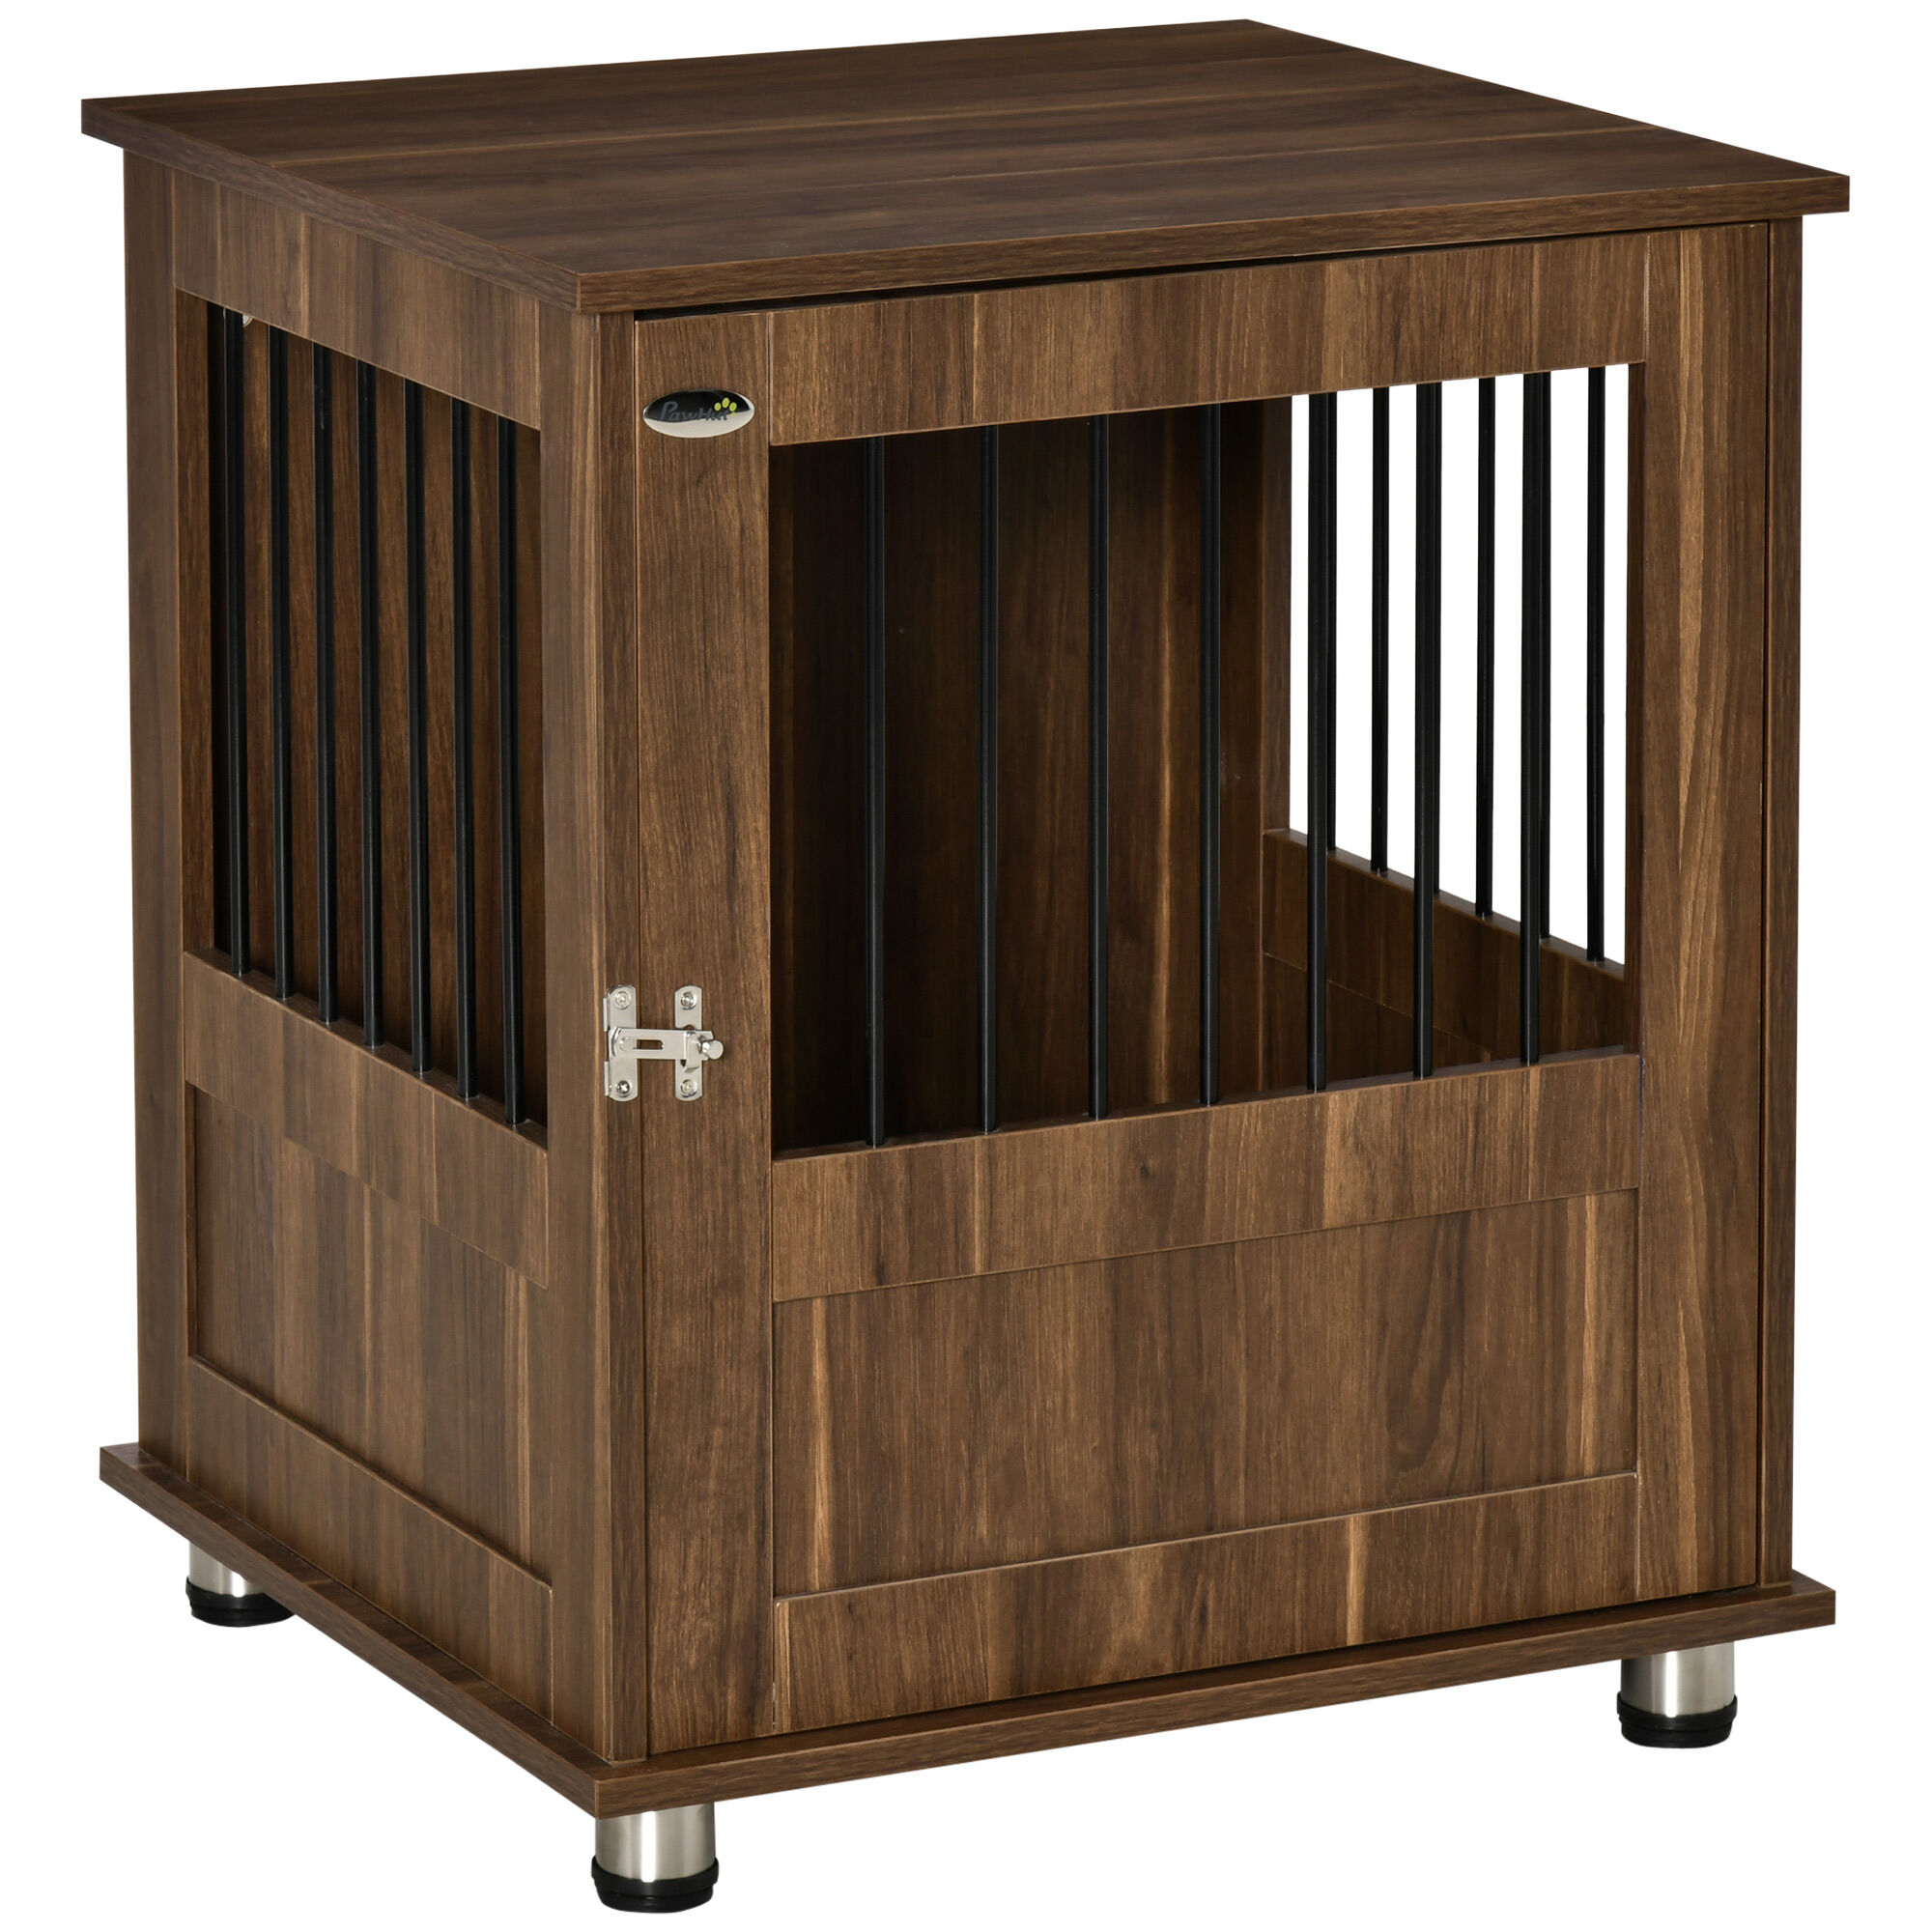 PawHut Furniture Style Dog Crate, Wooden & Wire End Table, Small Pet Crate with Magnetic Door, Indoor Decorative Dog Kennel Cage, Brown